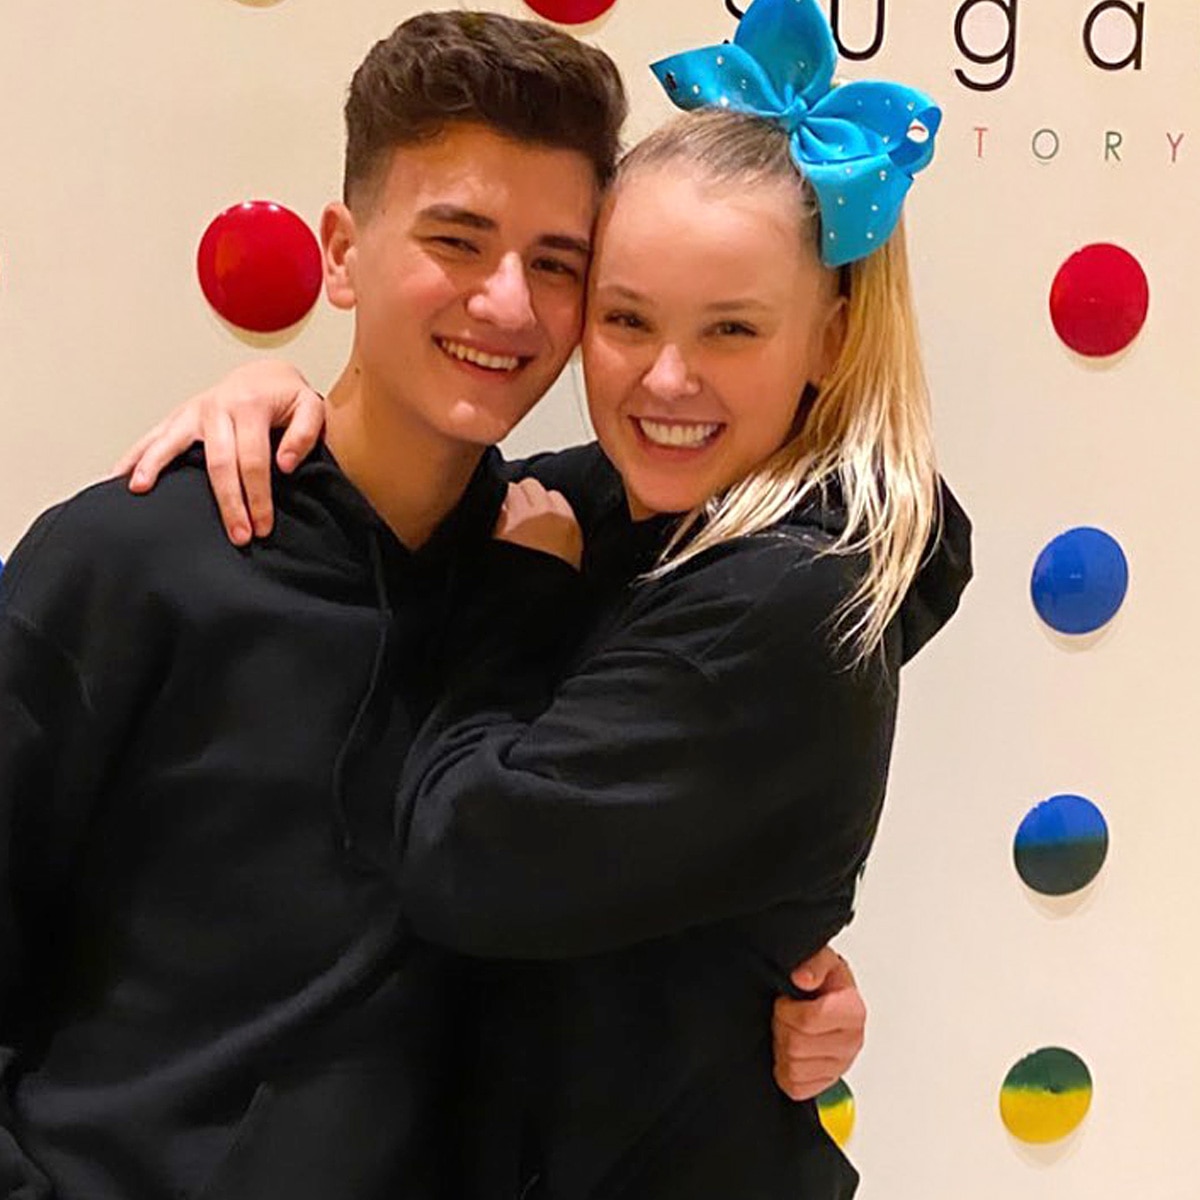 Jojo Siwa Defends Mark Bontempo From "Hateful" Comments After Their Brea